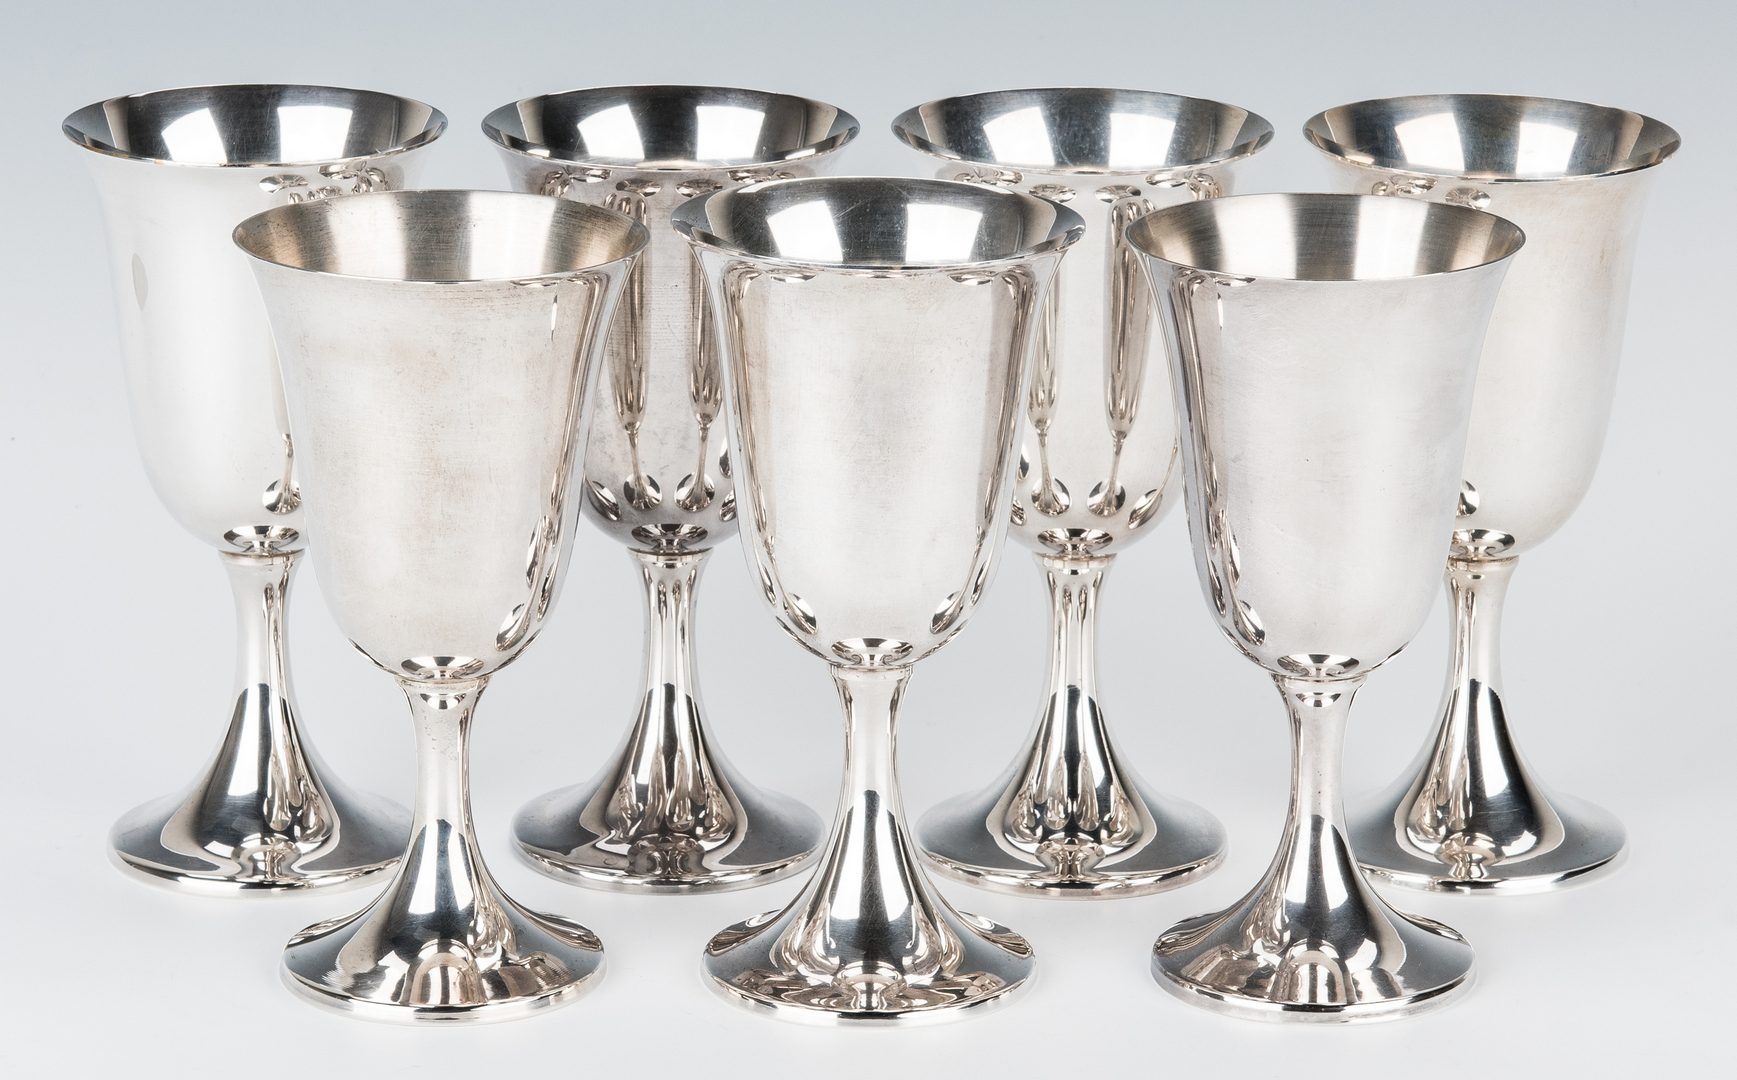 Lot 691: Sterling Silver Plates, Goblets & Cups, 37 items total